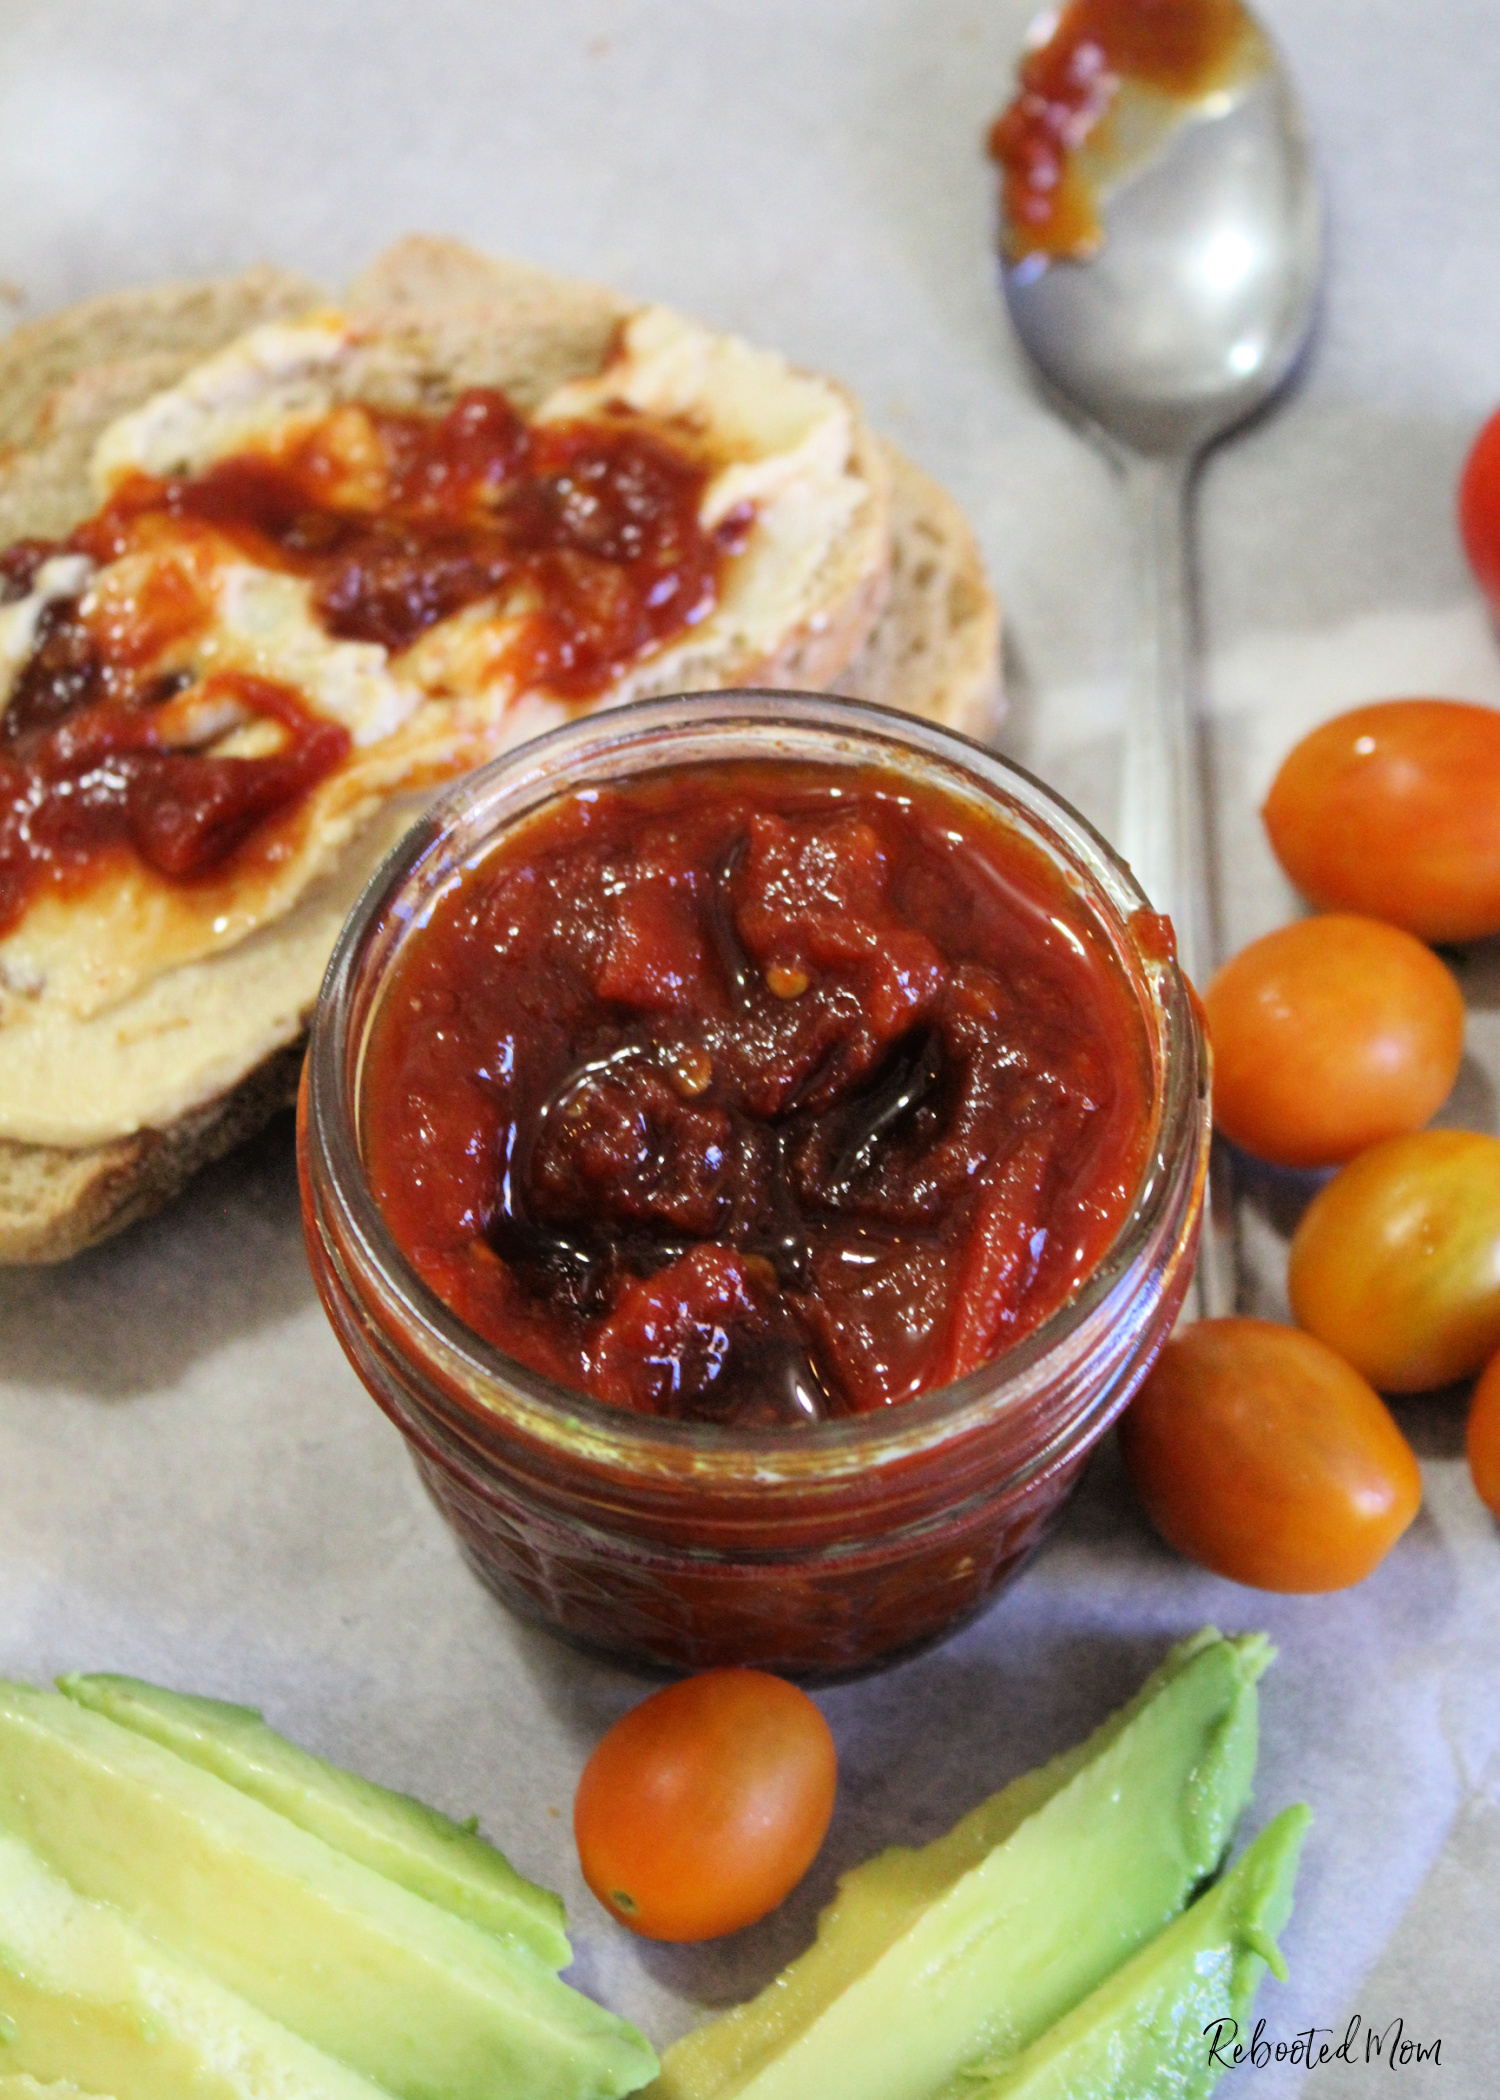 This Chipotle Tomato Jam combines the smoky flavor of chipotle chiles with garden fresh tomatoes for a jam that's unique and flavorful and perfect on toasted sourdough!